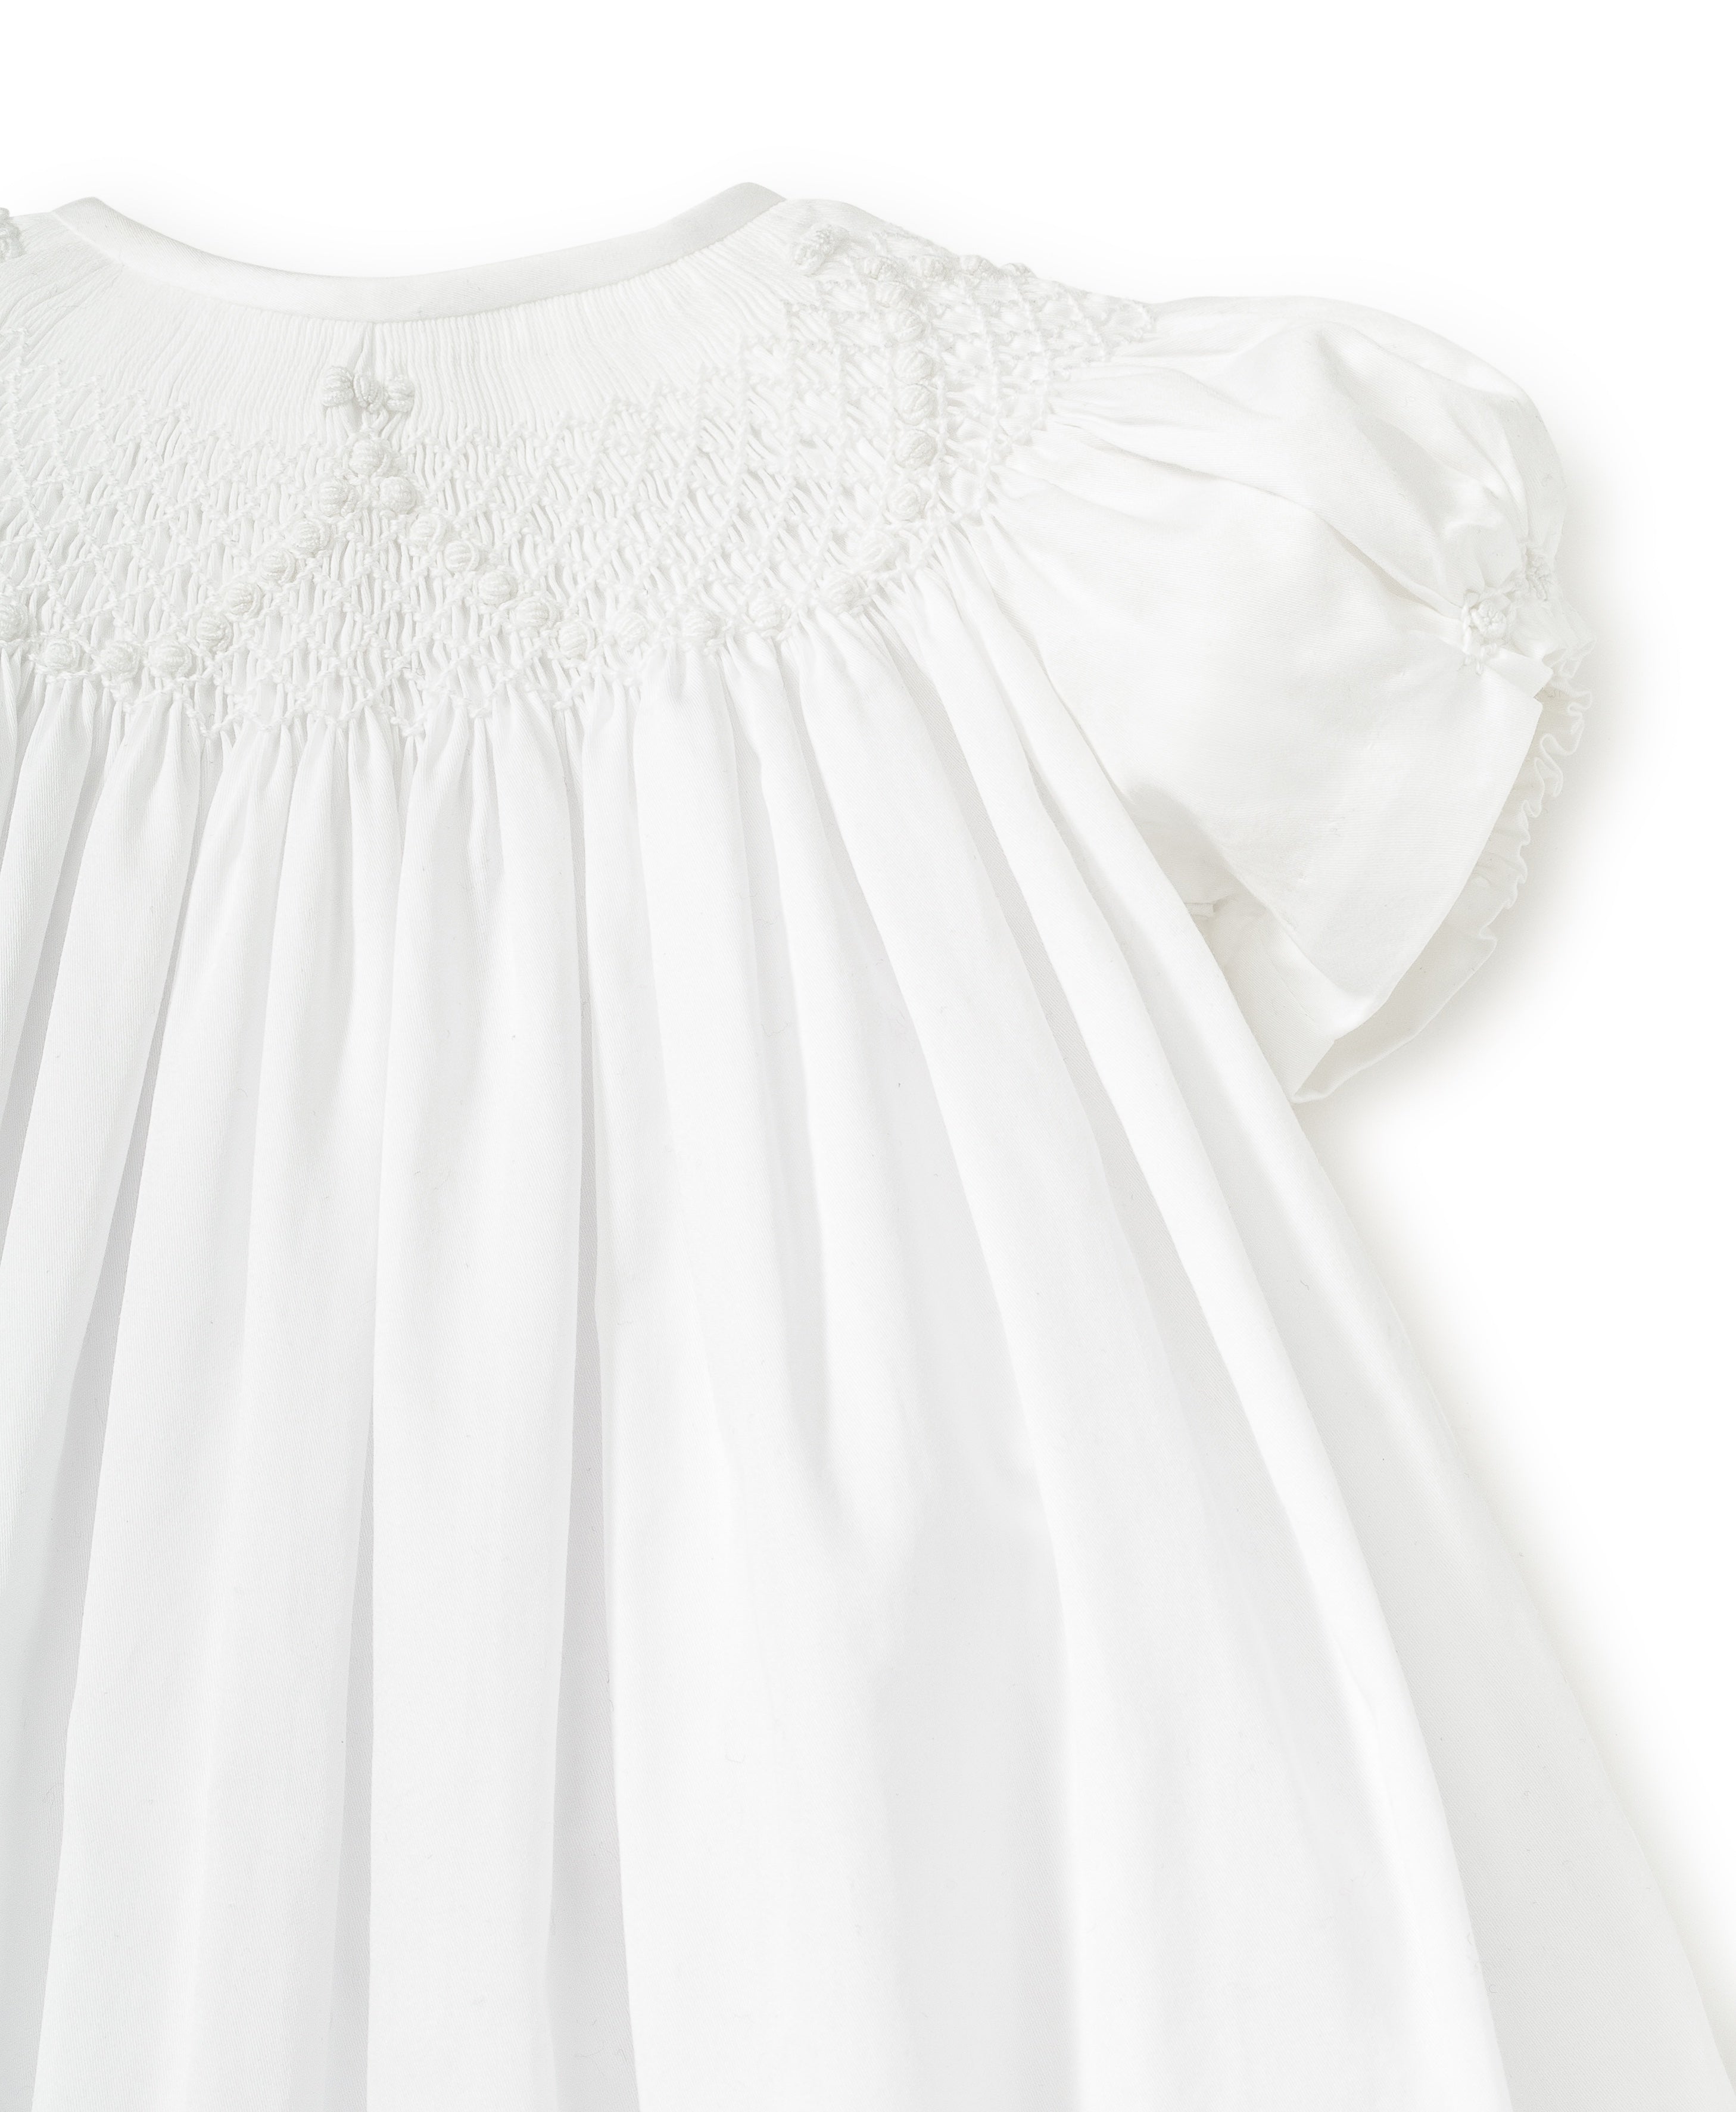 Christening Gowns Perfect For Princess Charlotte | Vanity Fair